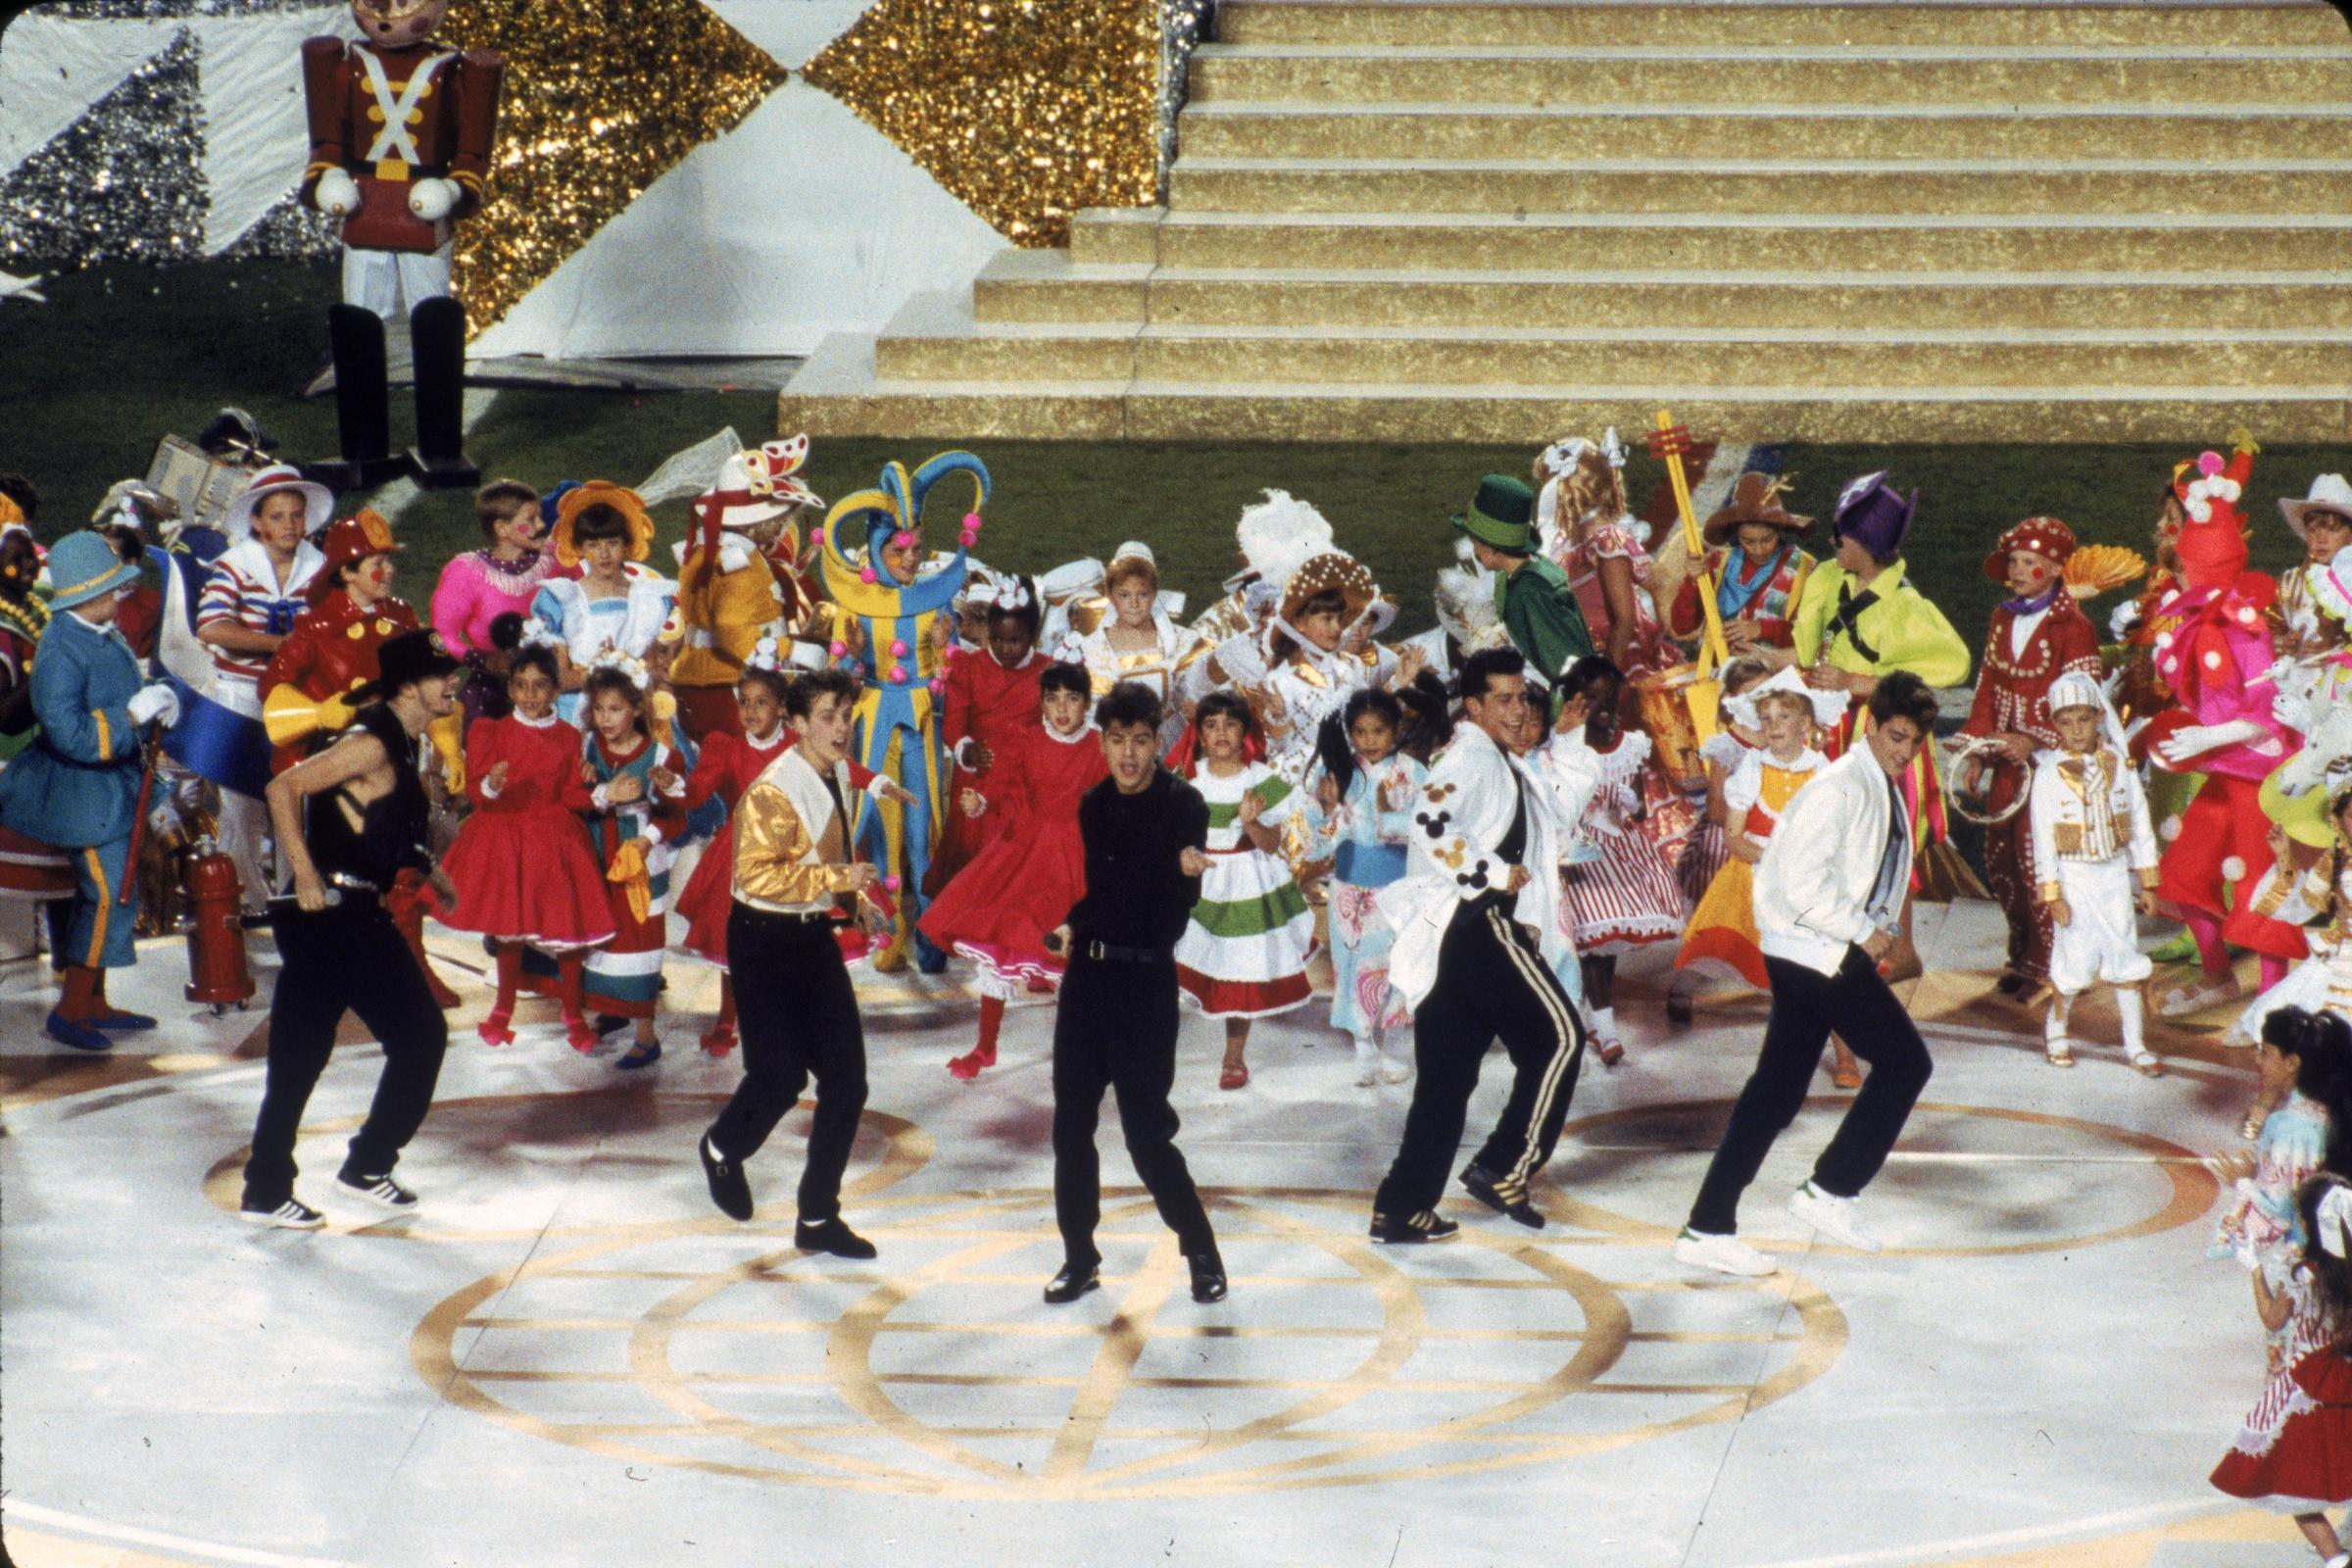 New Kids On The Block perform during Super Bowl XXV at Tampa Stadium on Jan. 27, 1991 in Tampa, Fla.